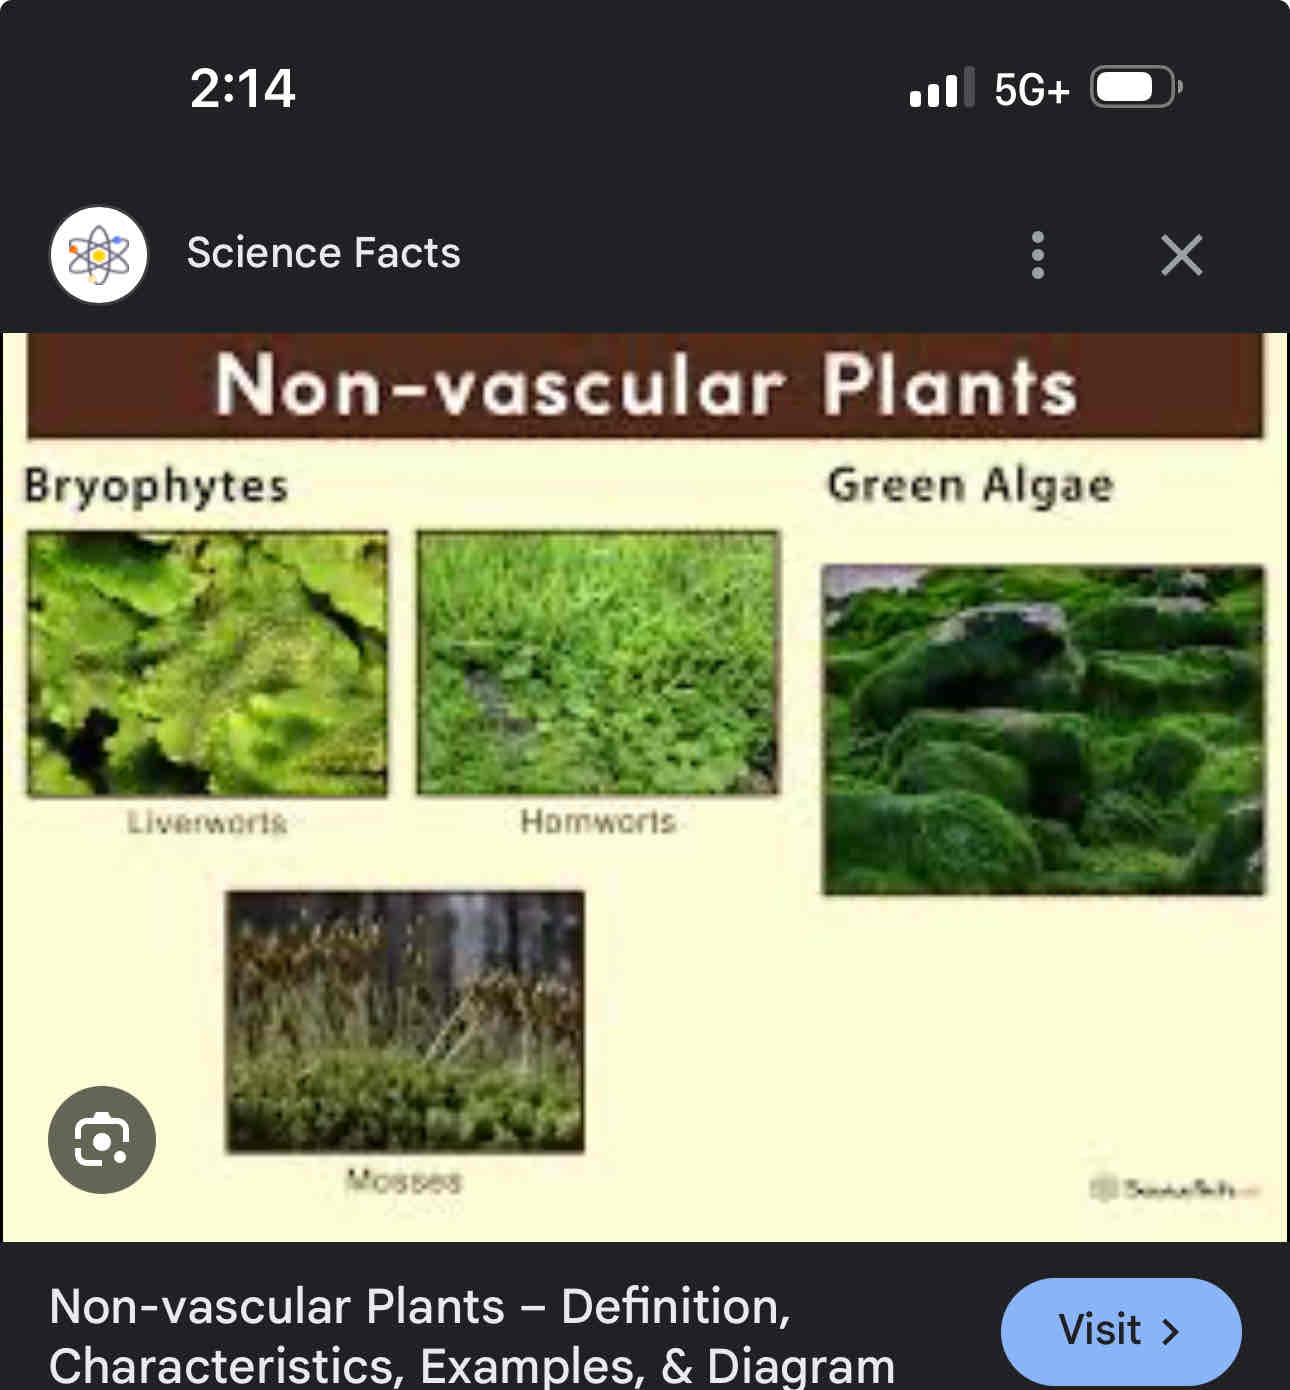 <p>Lack true roots, stem with a vascular tissue growth and grows moist environment, only grows several centimetres in height, example mosses, liverwort, and hornworts</p>